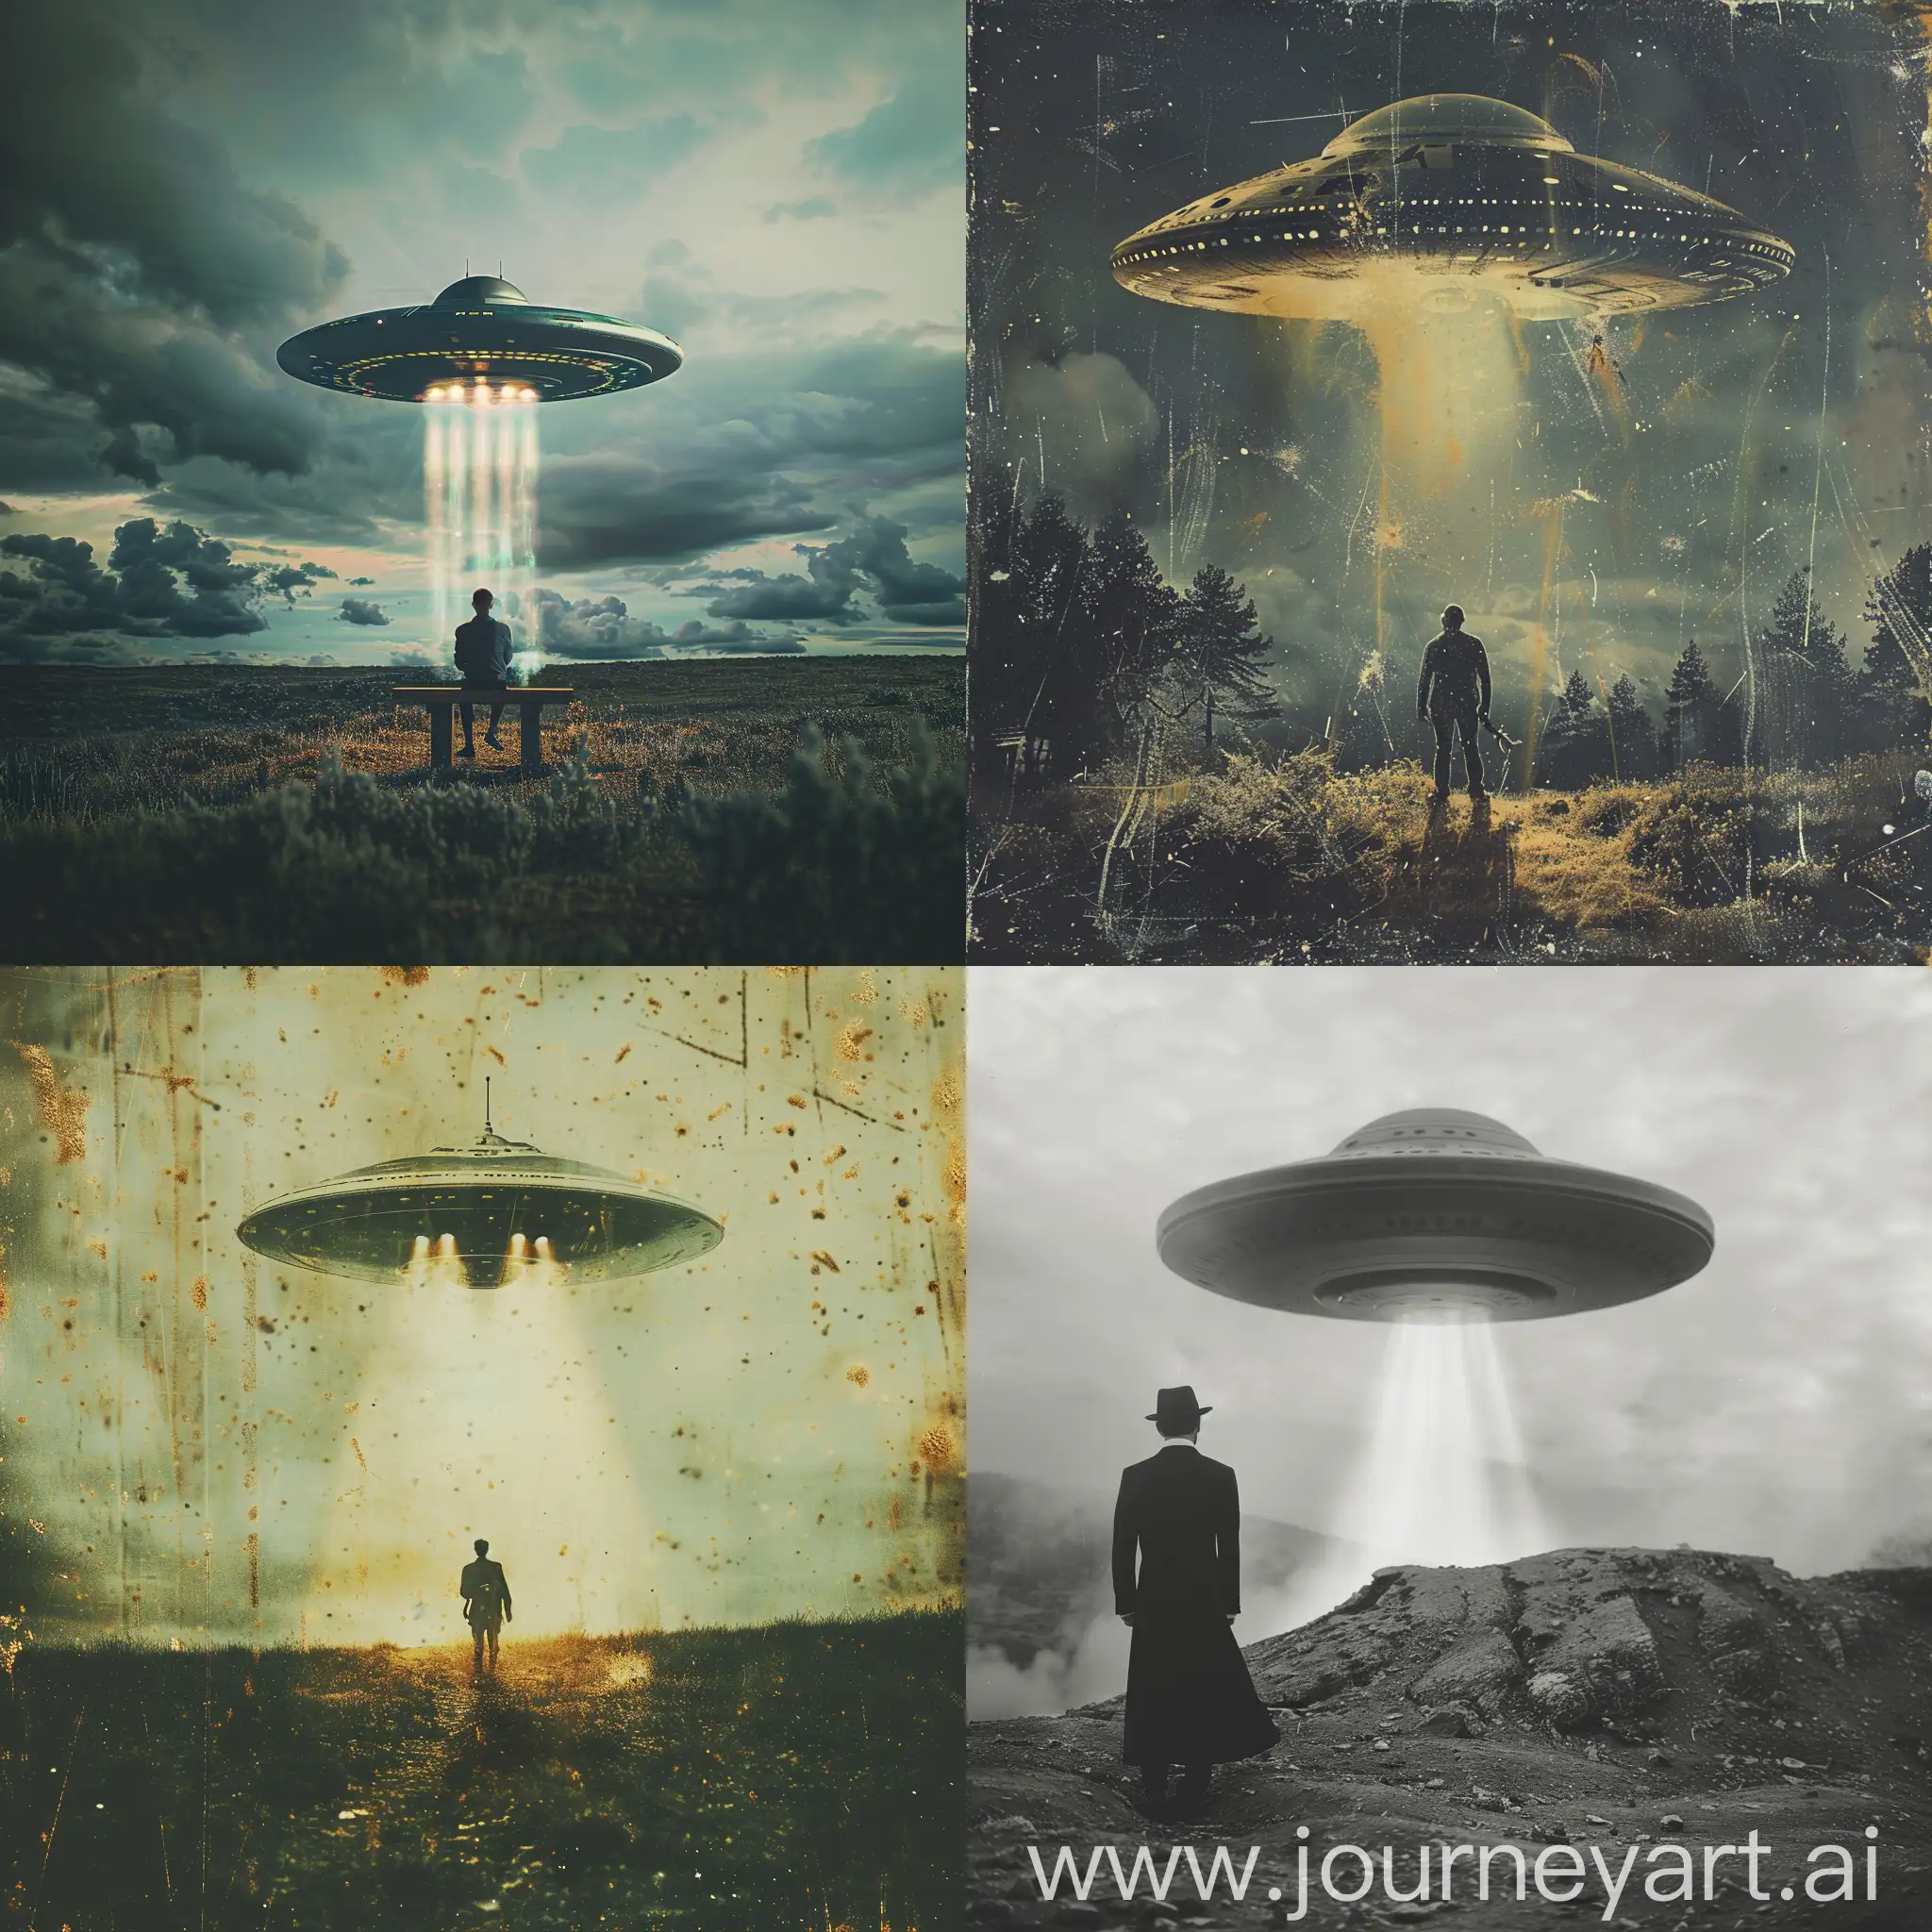 Man-Abducted-by-UFO-Surreal-Extraterrestrial-Encounter